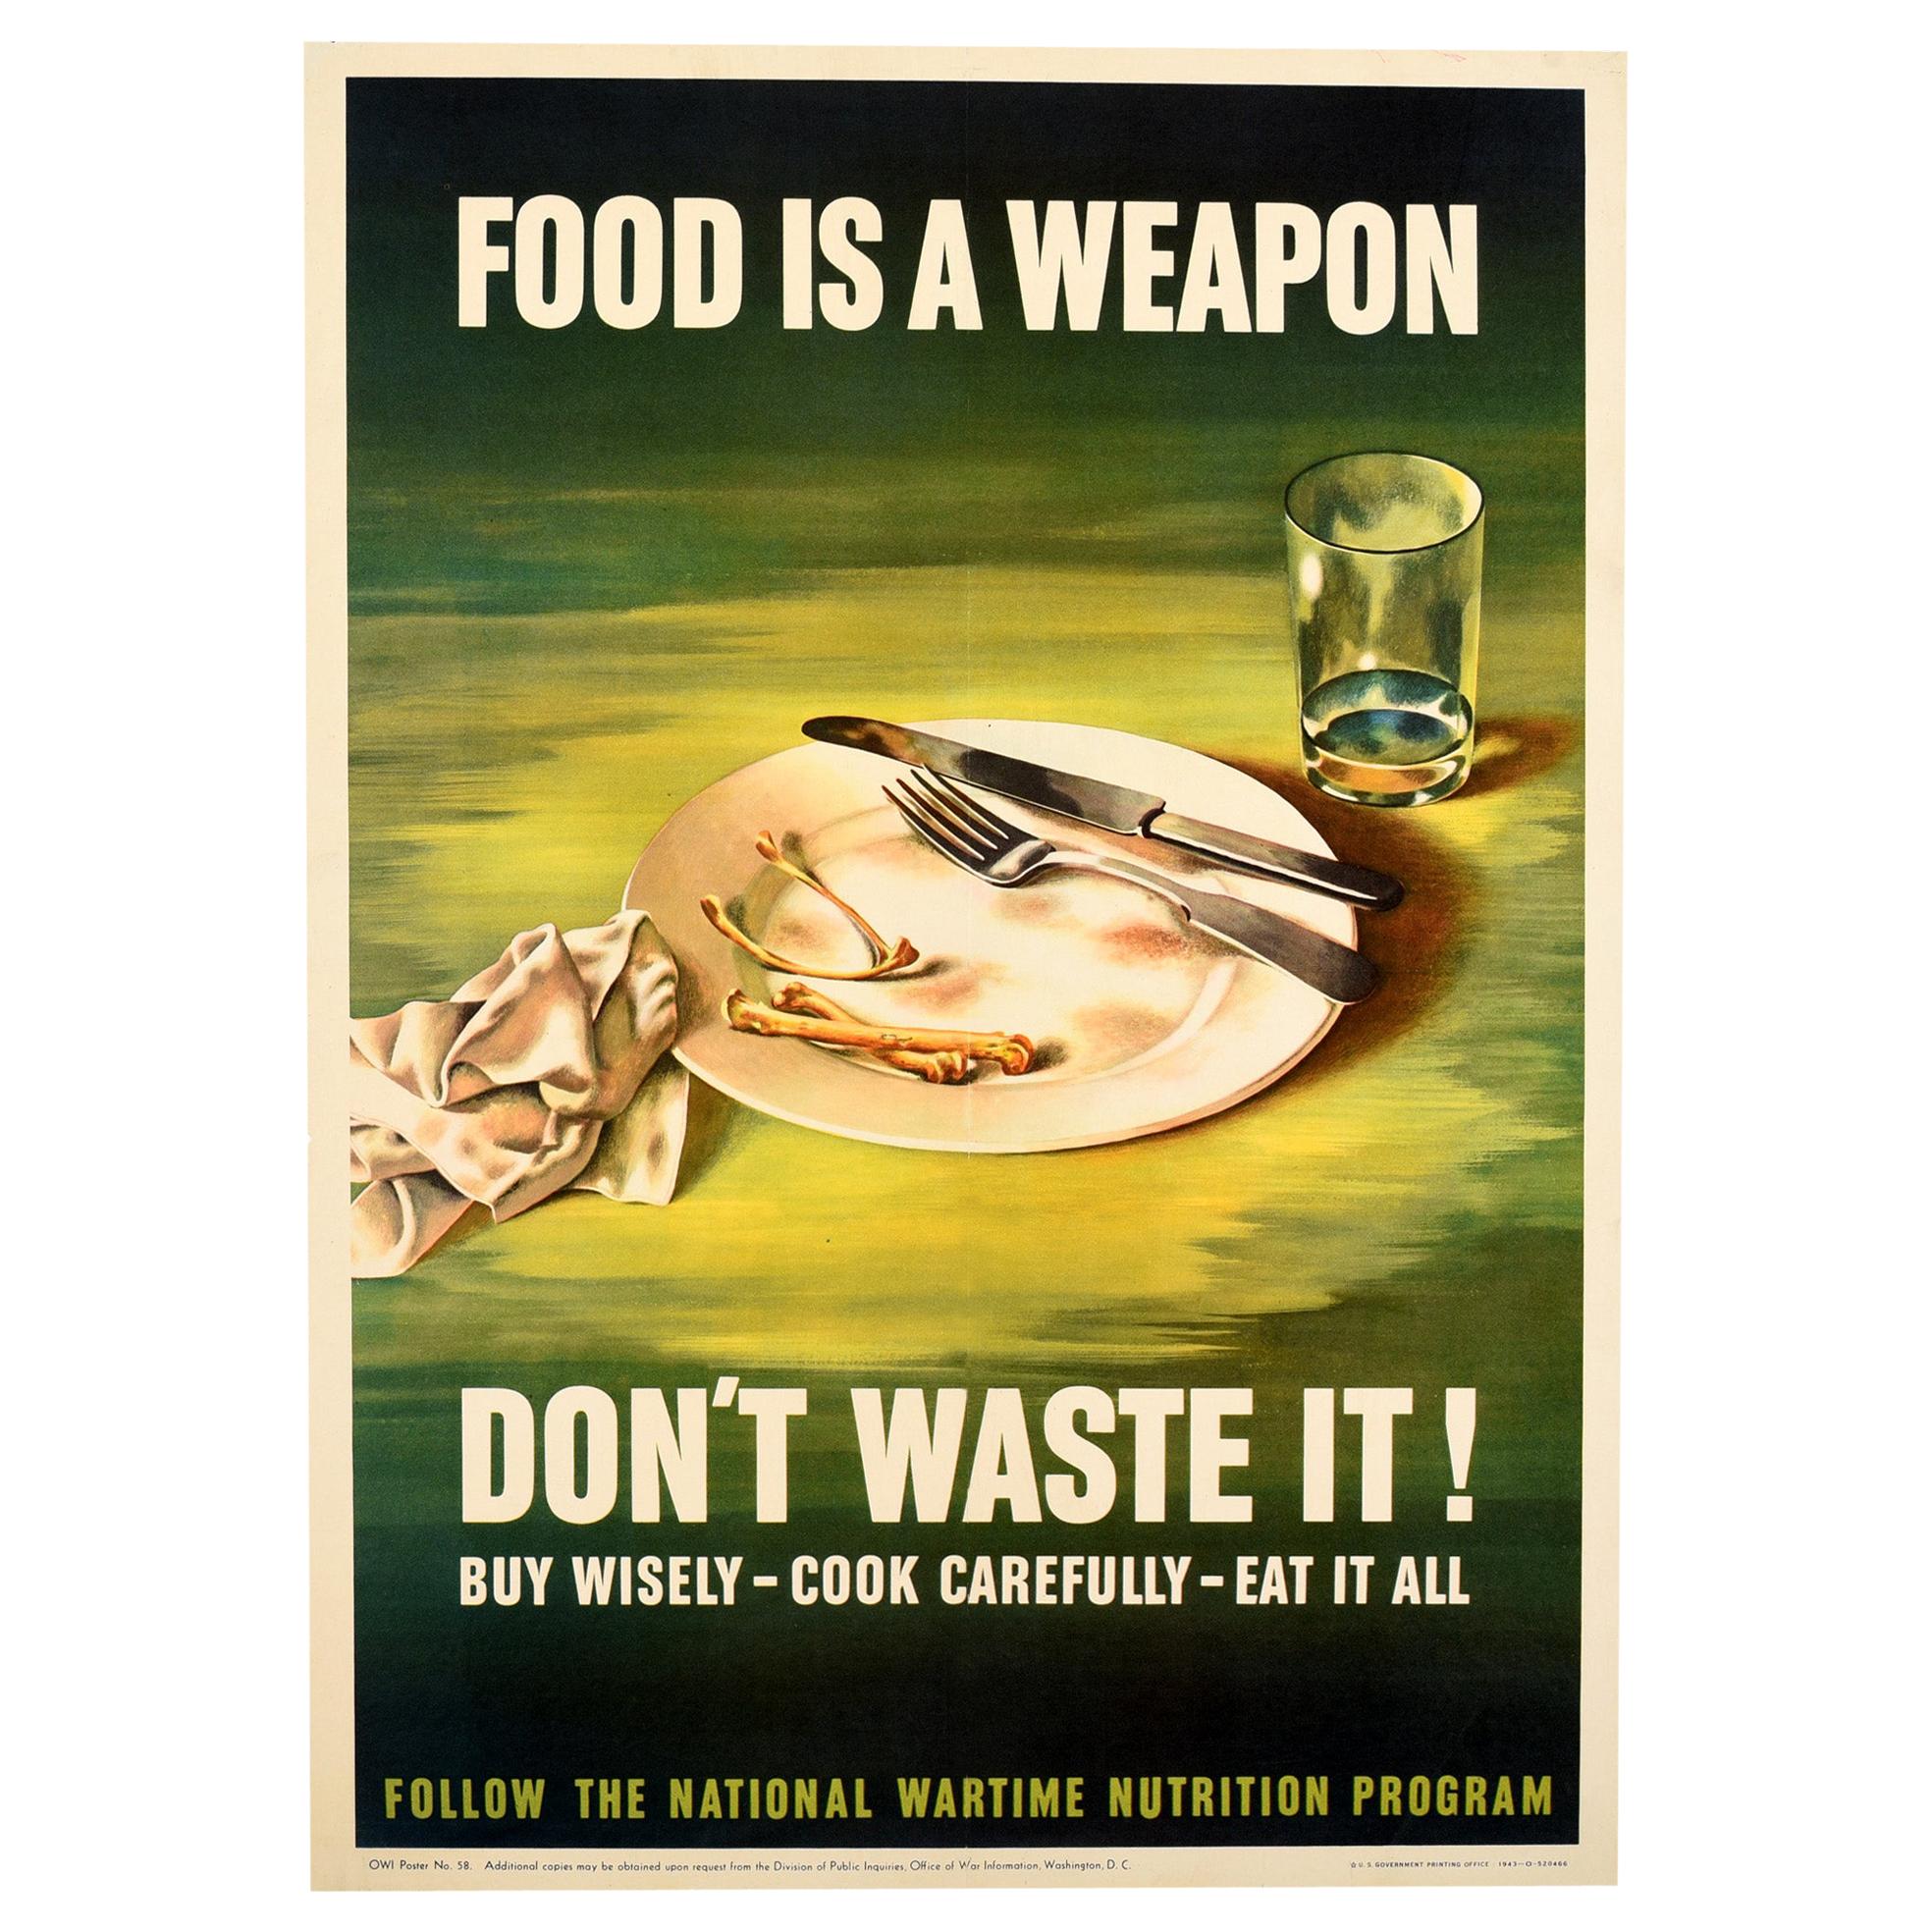 Original Vintage Poster Food Is A Weapon Don't Waste It WWII Wartime Nutrition For Sale